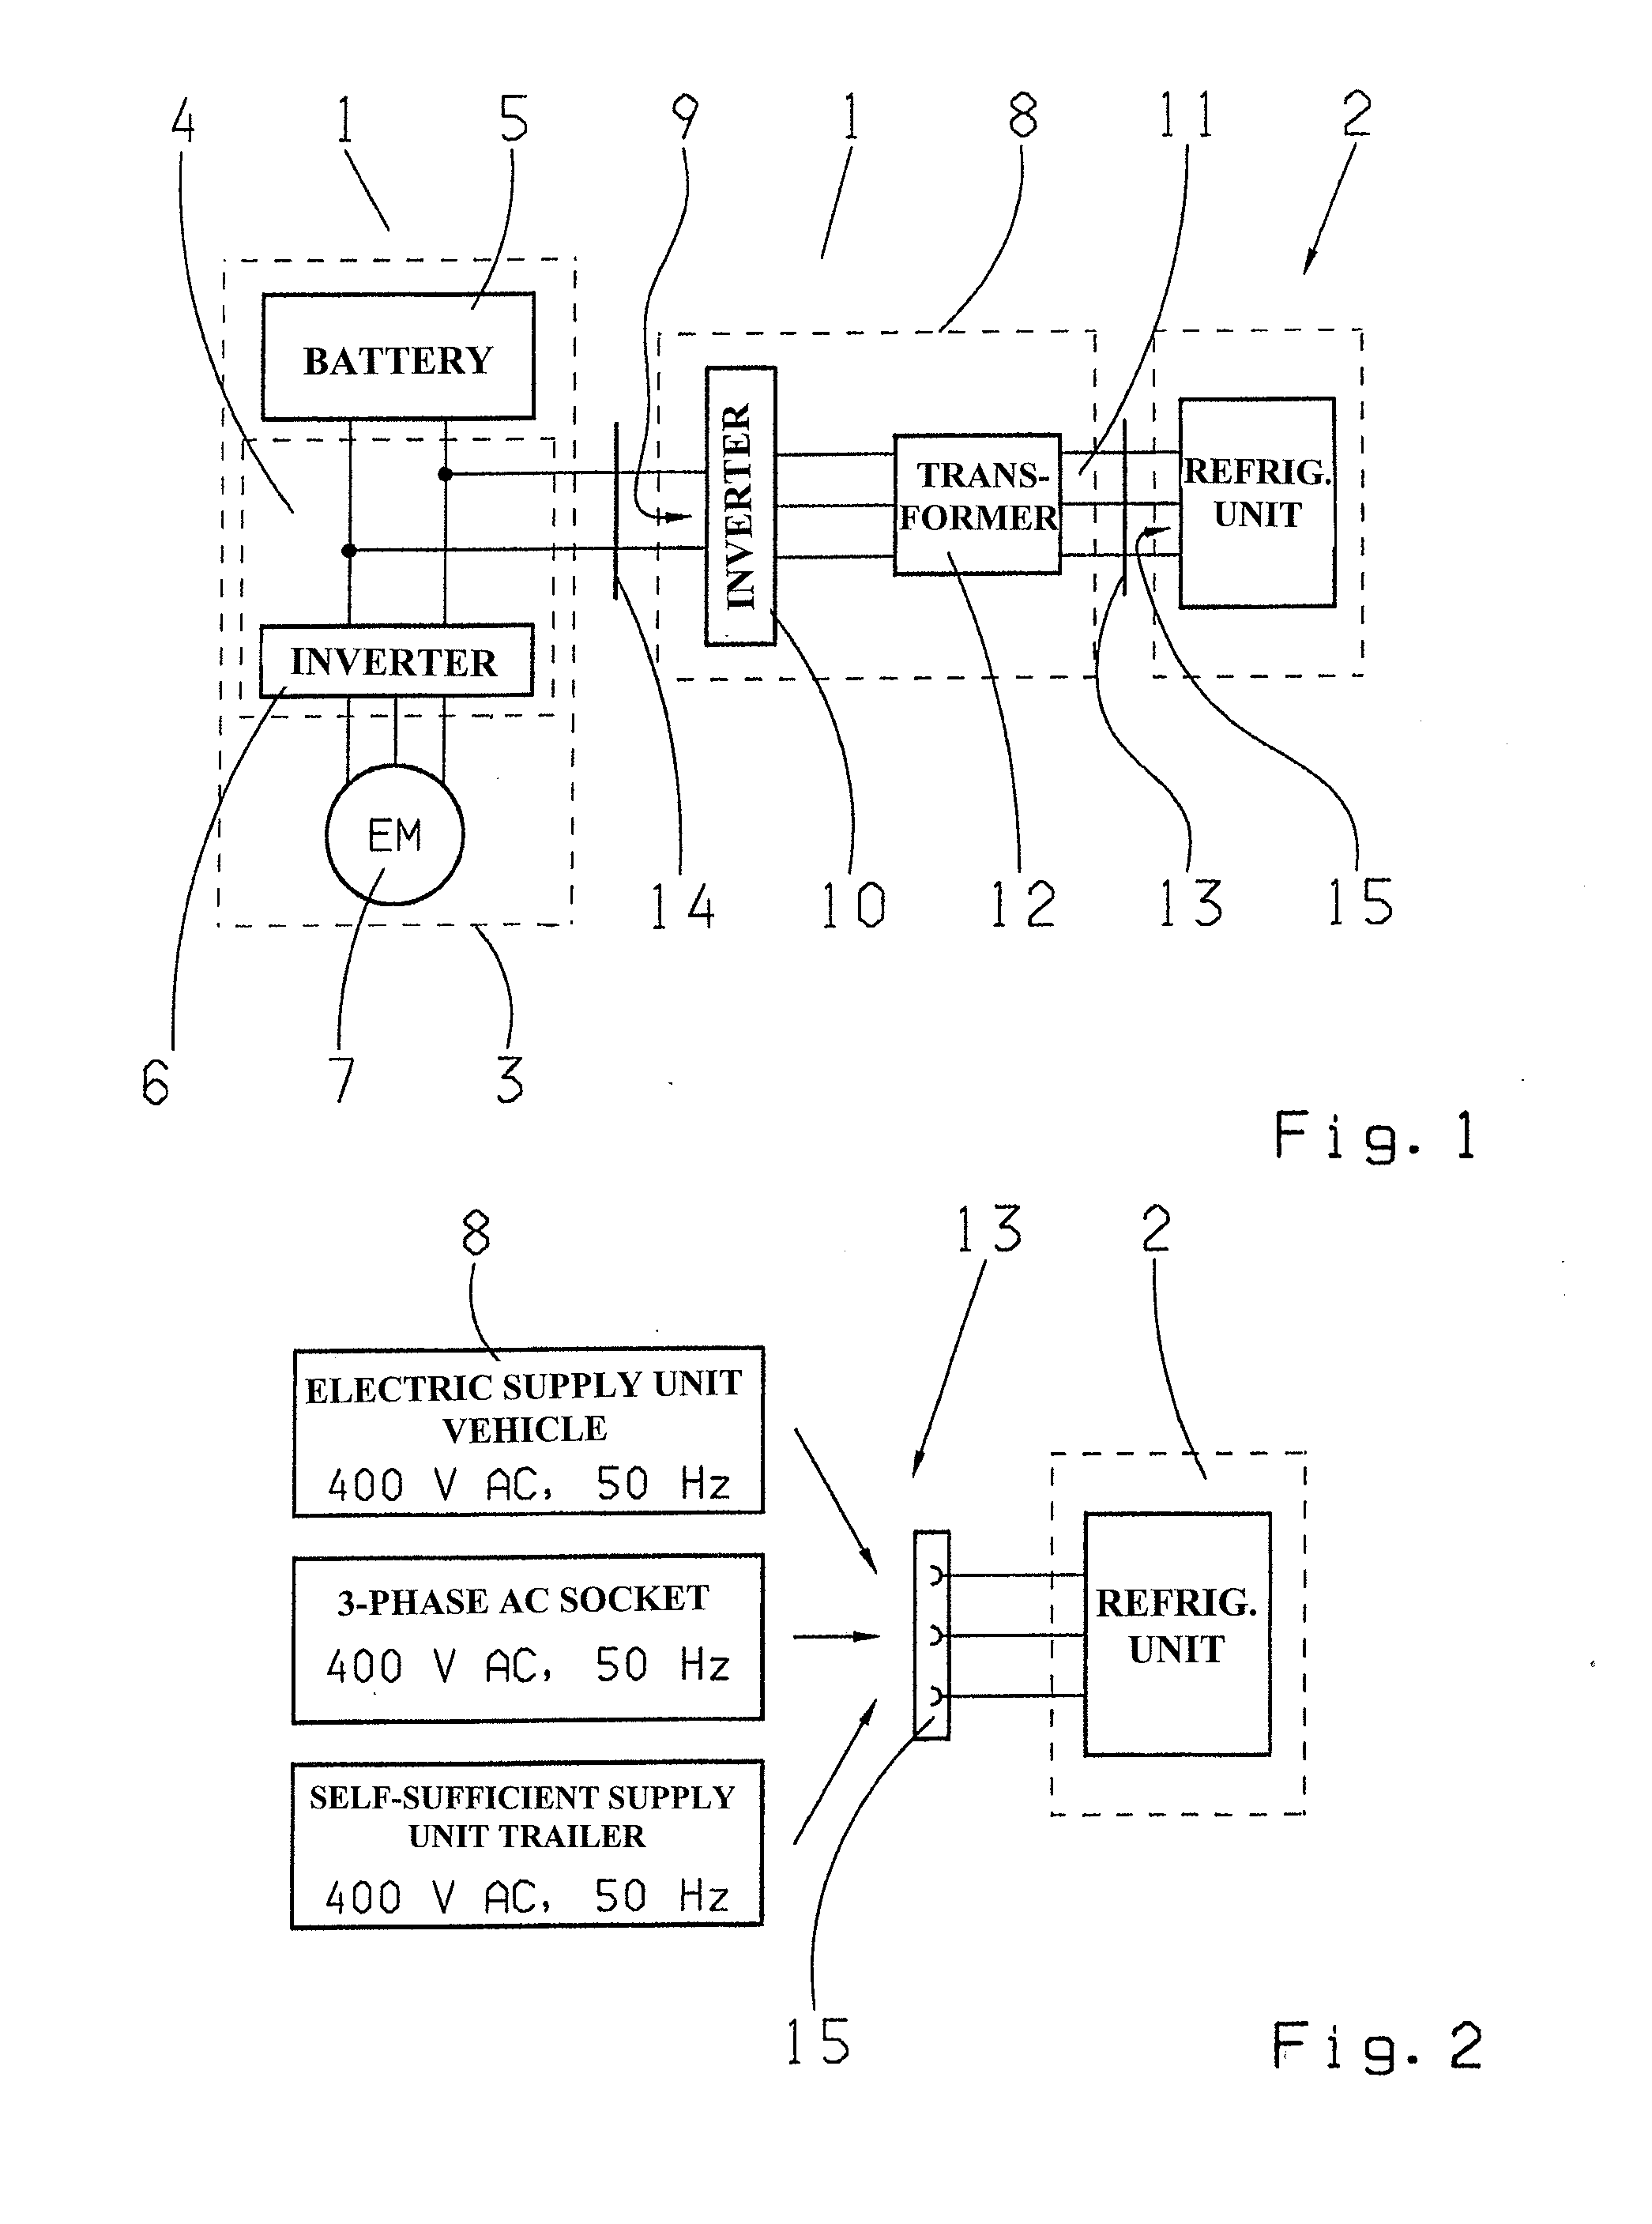 Power supply device and unit